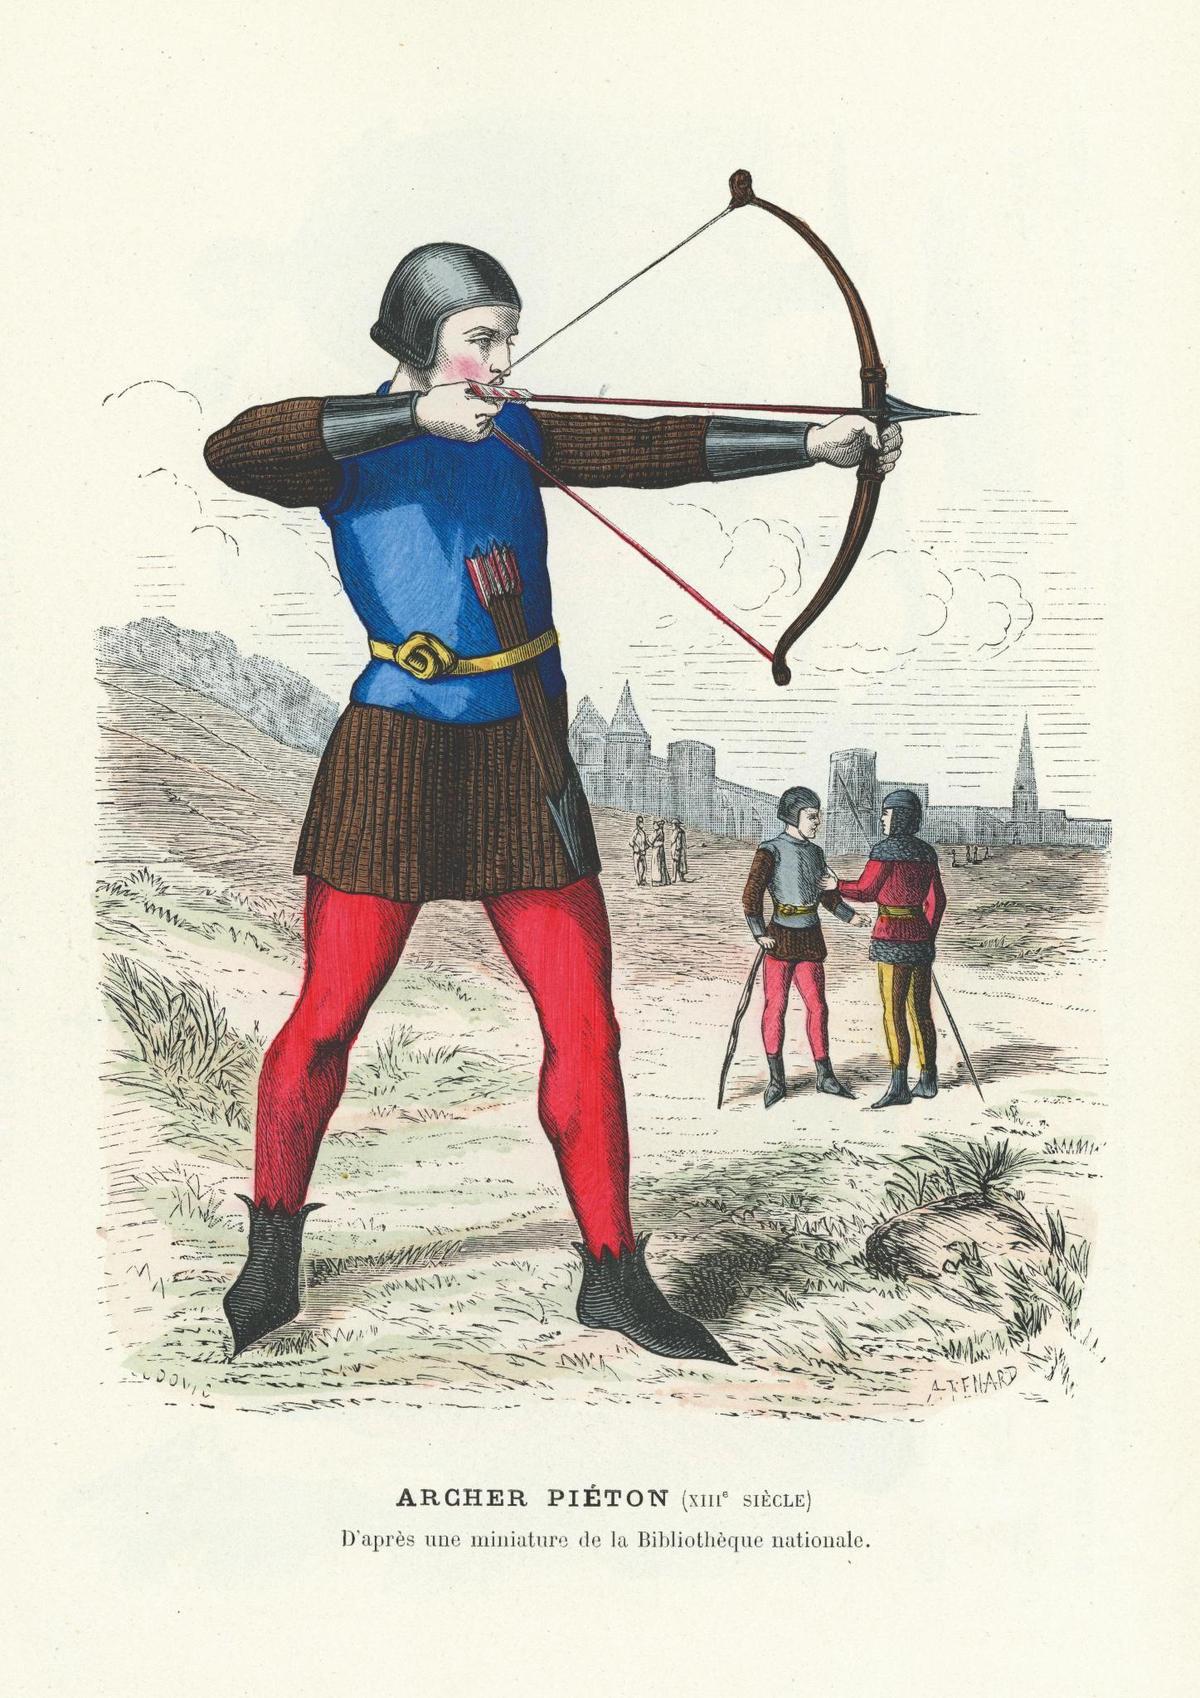 While the English longbow was the more successful military weapon of the middle ages, this 13th century French archer was also a force to be reckoned with. (duncan1890/Getty)